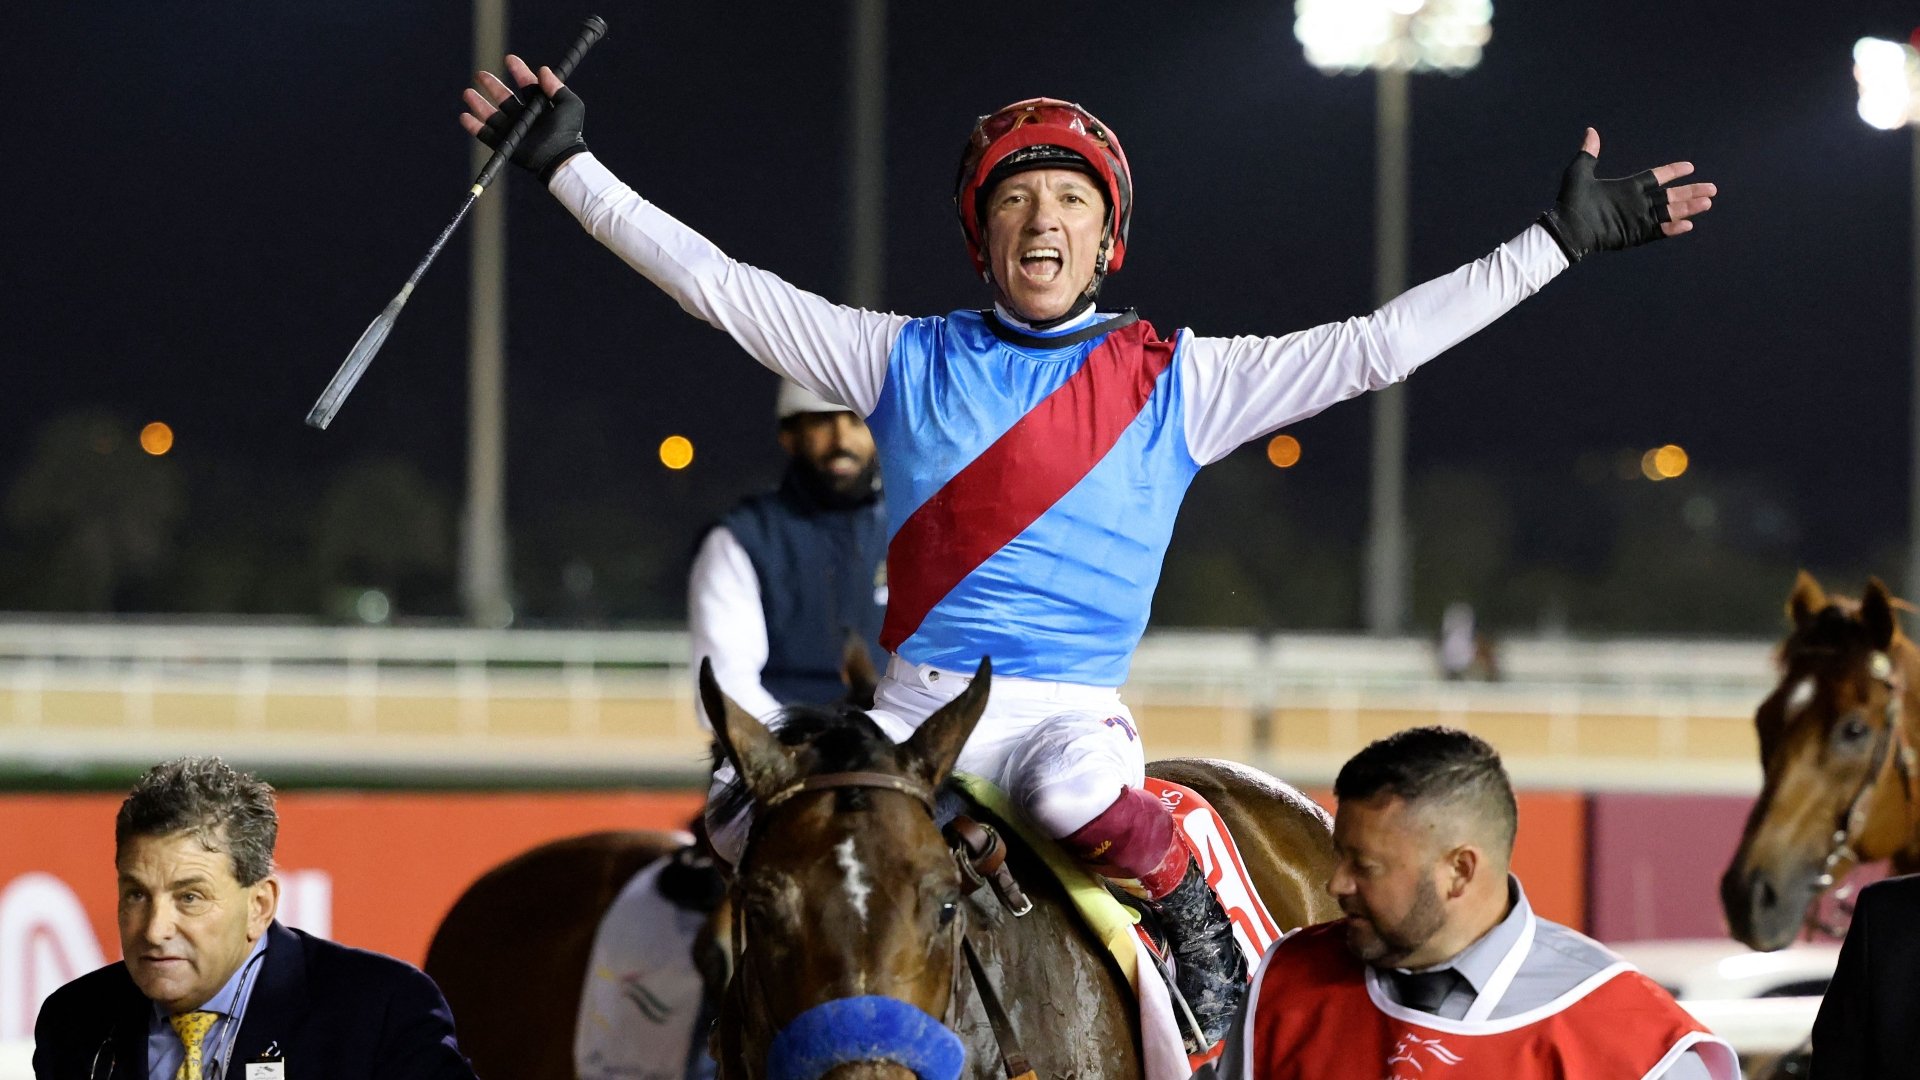 Dubai World Cup Live Stream - Watch this Group One live from Meydan